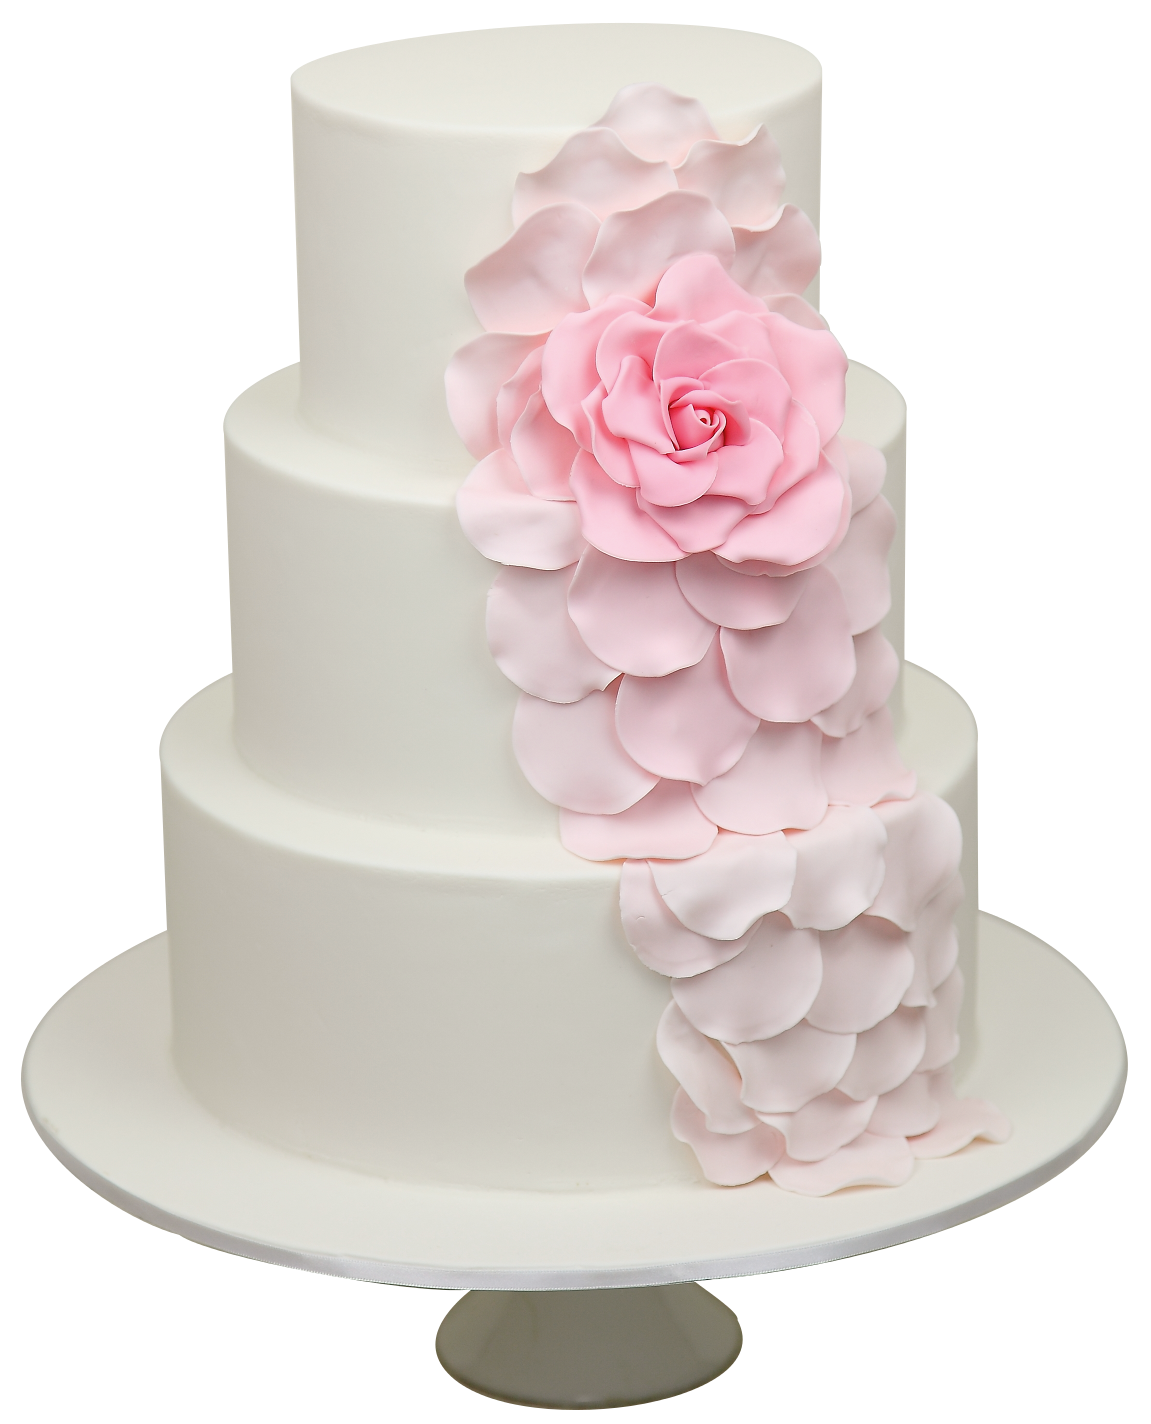 Buy Elegant and Simple: 1st White Birthday Cake at Grace Bakery, Nagercoil